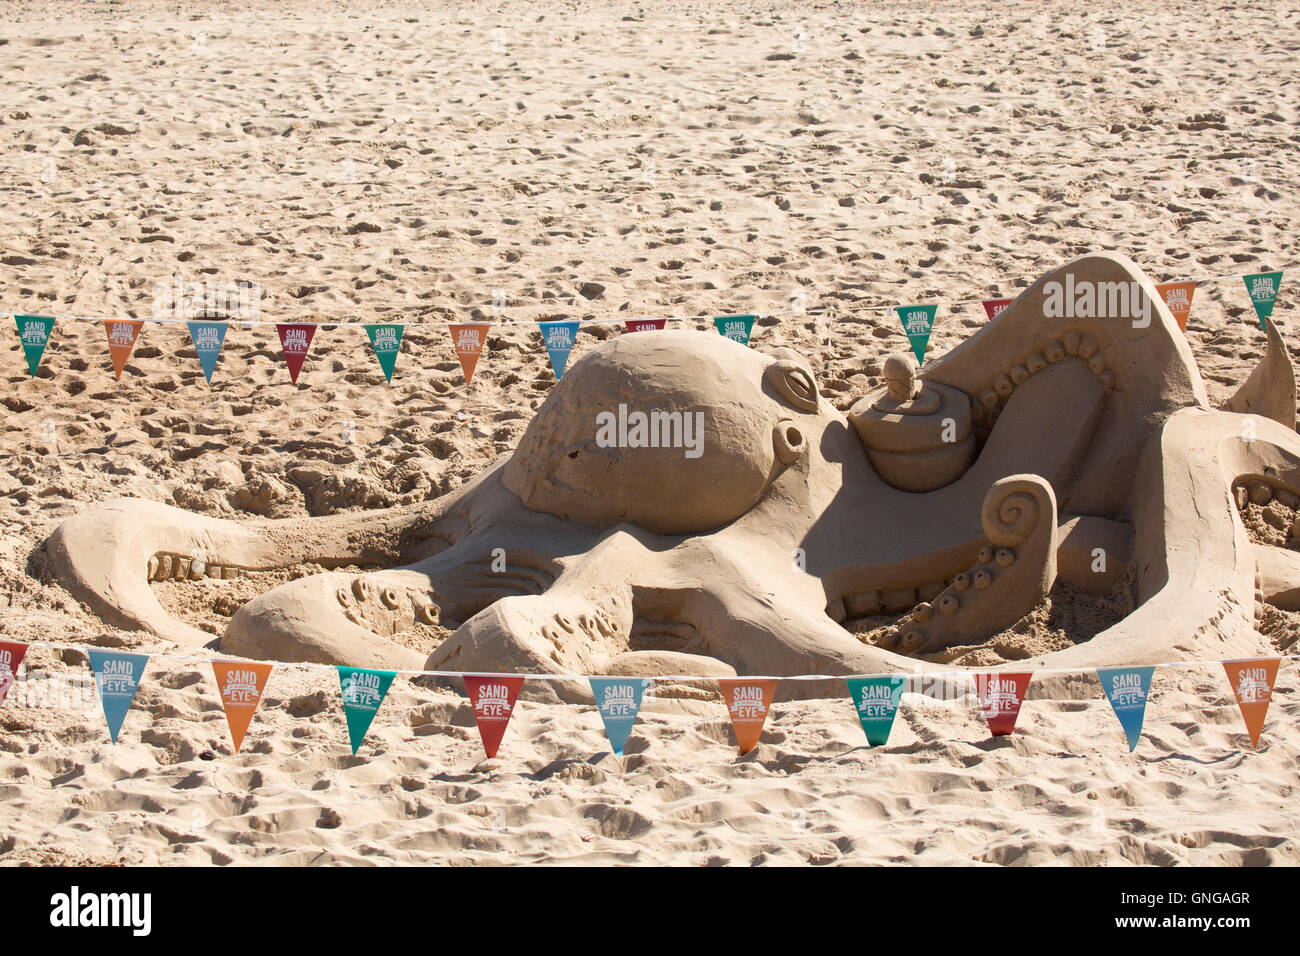 A giant octopus sand sculpture during the Sand In Your Eye event at Blyth Beach in Northumberland, England. Stock Photo